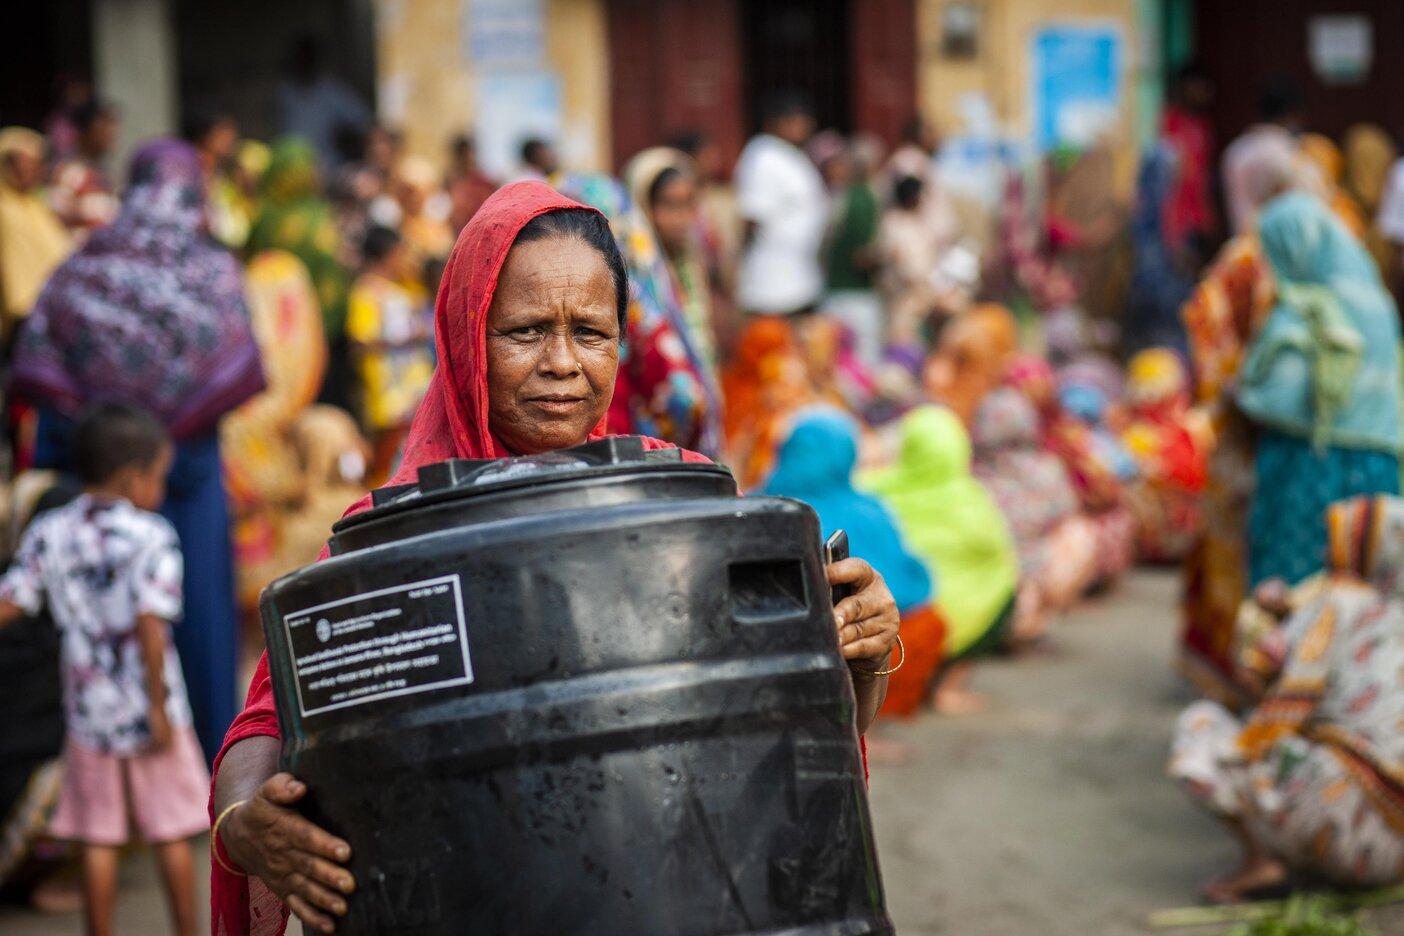 In Bangladesh, people received cash, storage drums like this one, hygiene and health kits ahead of flooding in July 2020. Credit: FAO/Fahad Kaizer